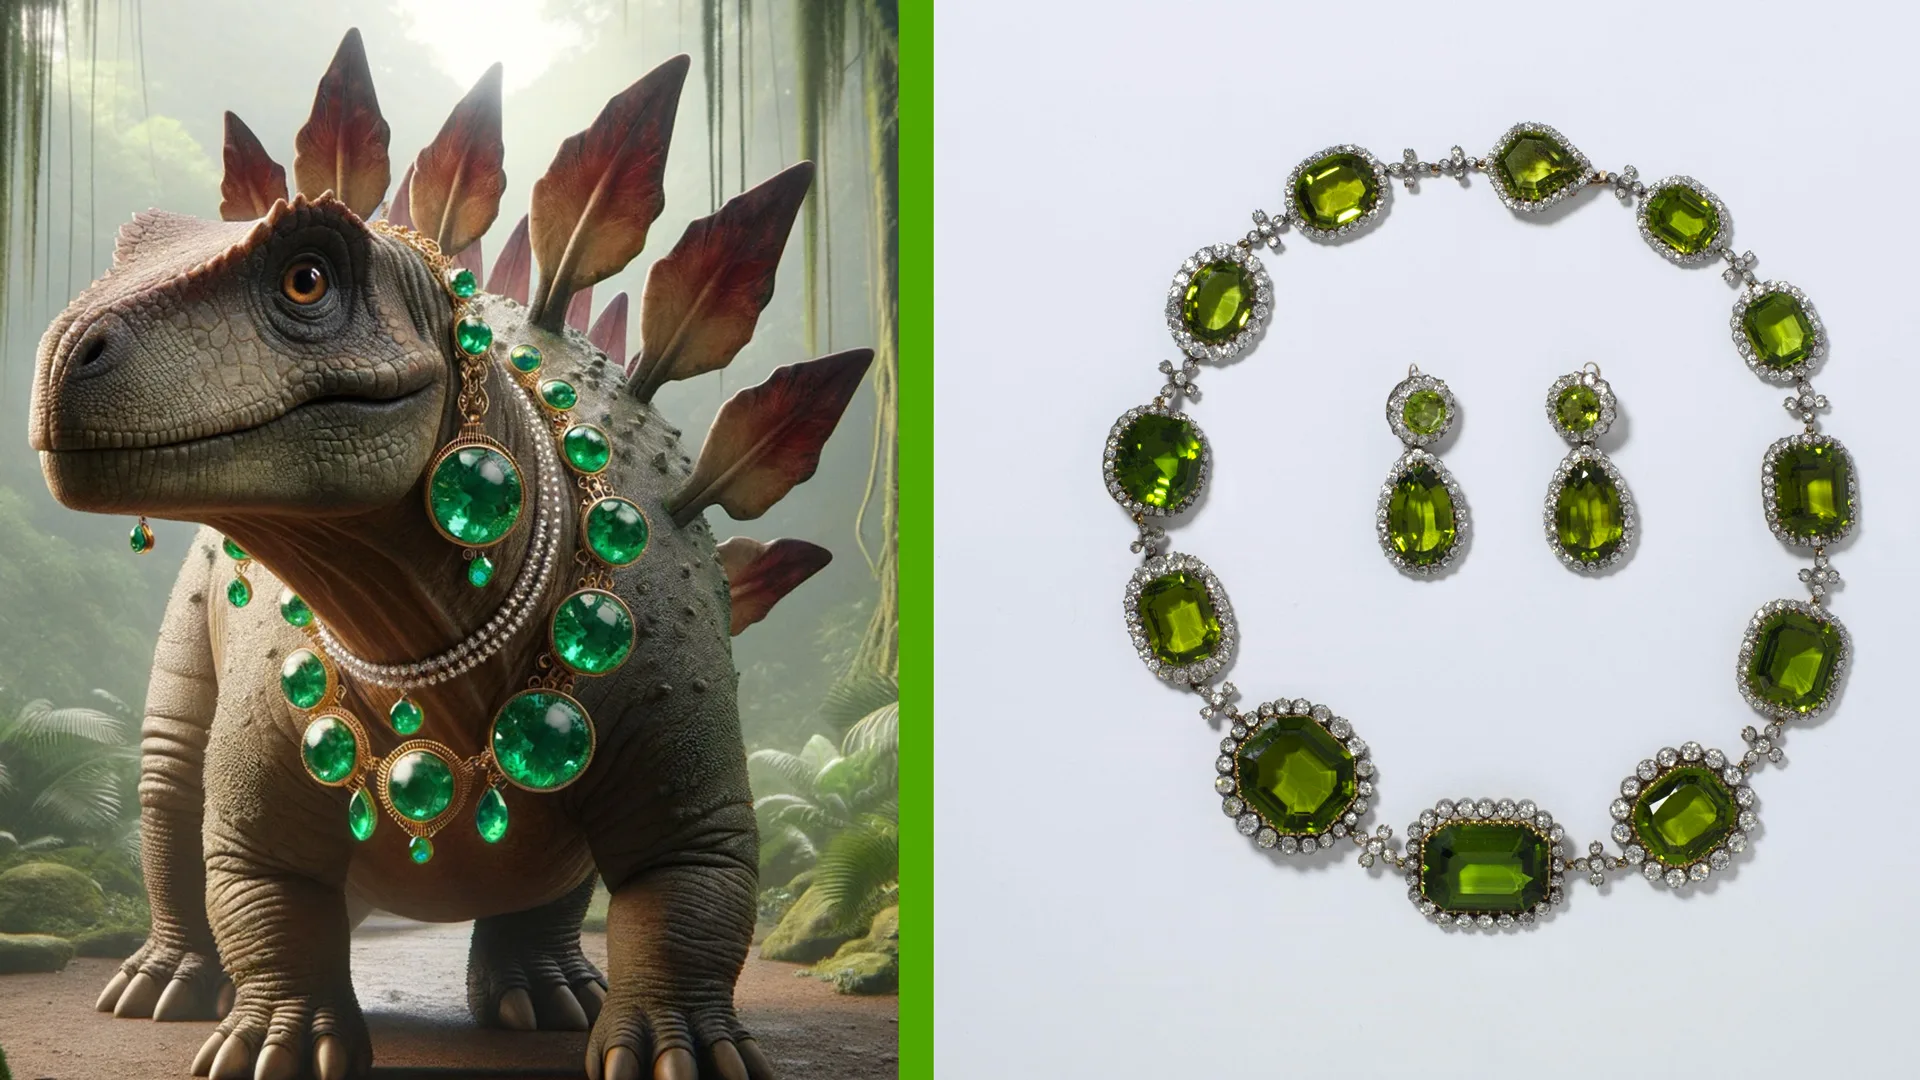 An AI image of a stegosaurus wearing a peridot necklace and earrings next to the real photograph of the necklace and earrings from the V&A collection